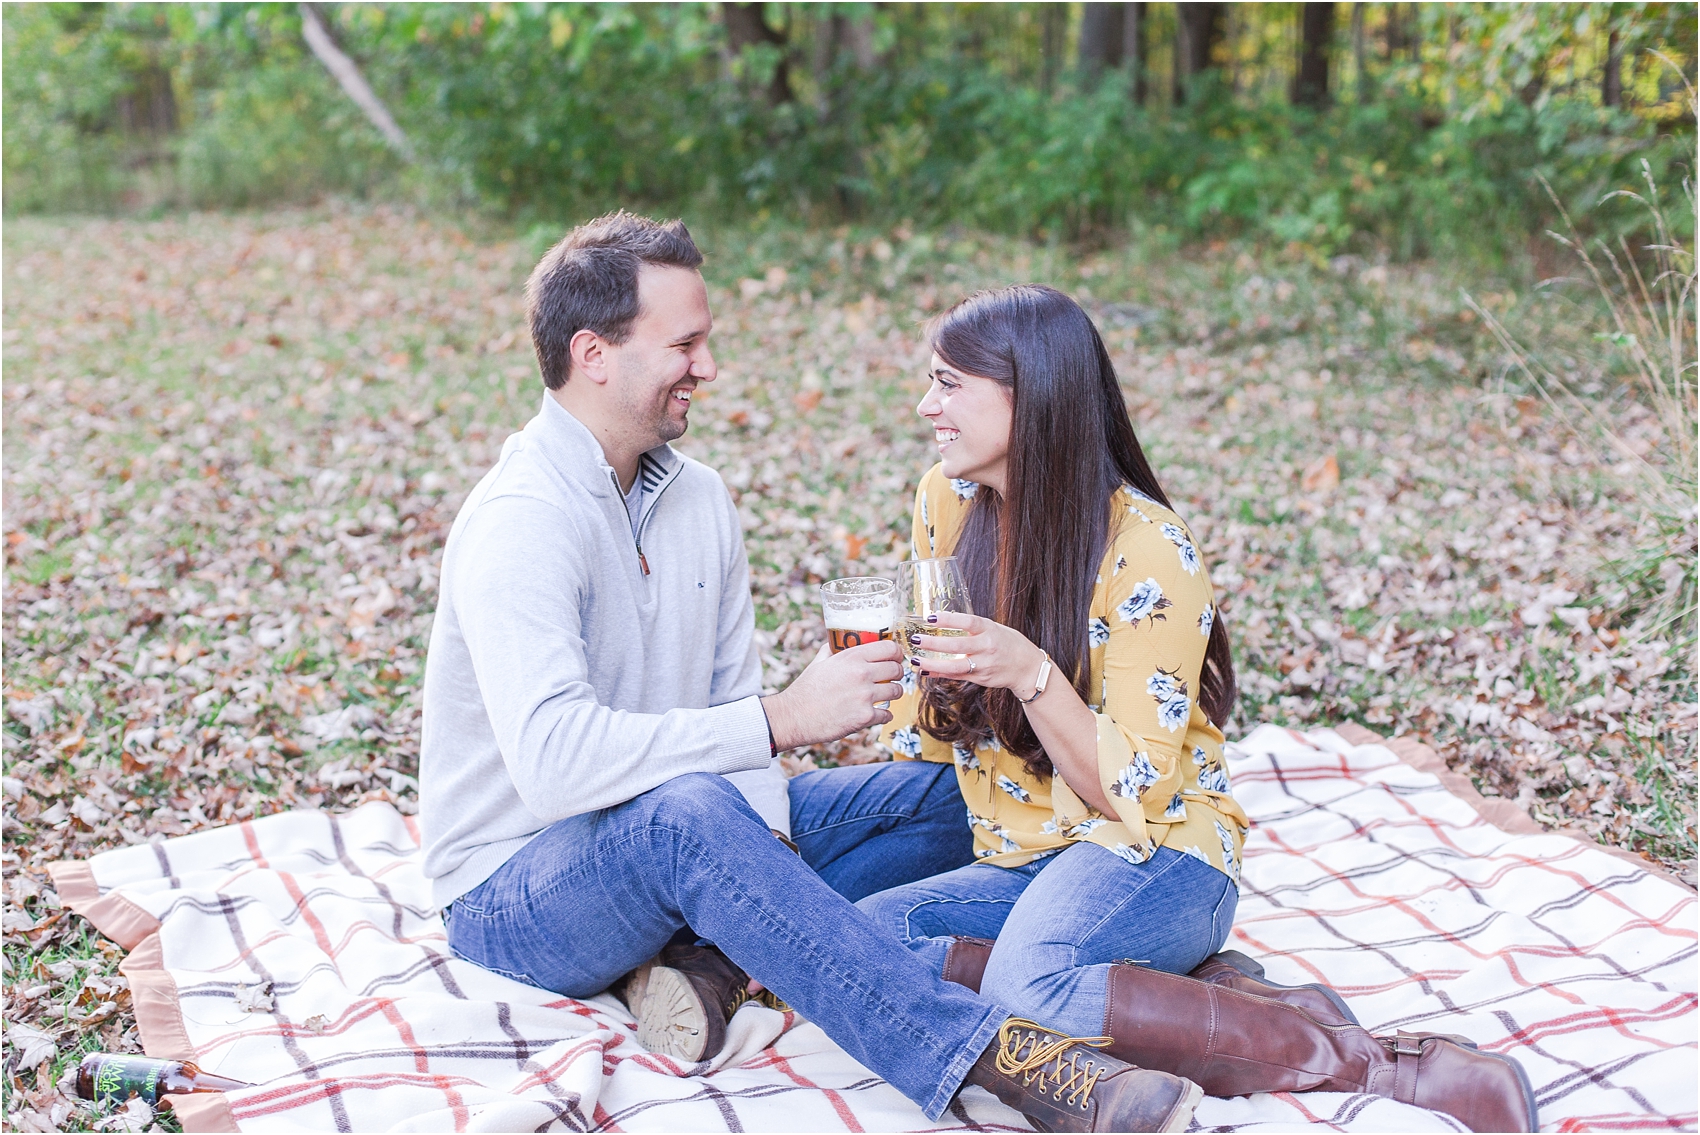 relaxed-autumn-engagement-photos-at-hudson-mills-metropark-in-dexter-mi-by-courtney-carolyn-photography_0028.jpg